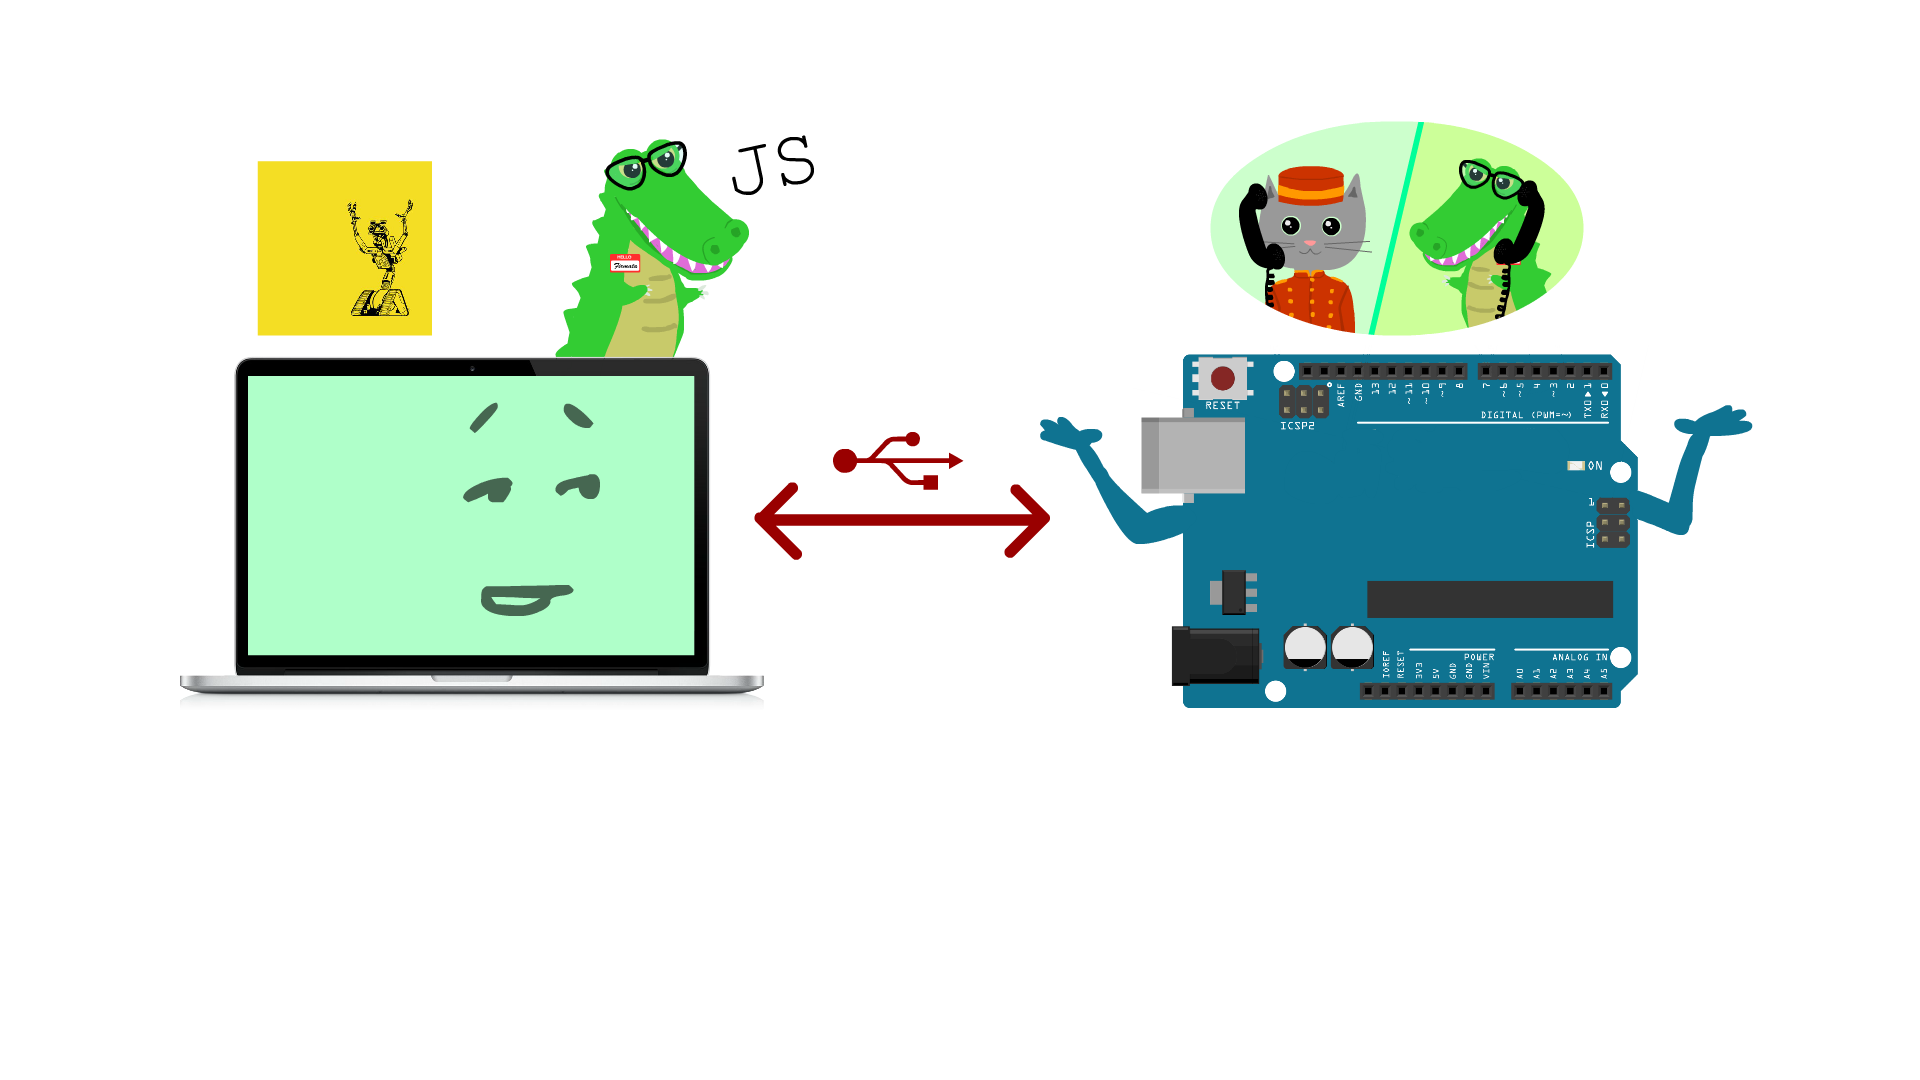 illustration of an Arduino and laptop confused about how to speak to one another. The laptop has an awkward facial expression, and the Arduino is throwing its arms up in a confused manner. The phone call between the crocodile and the cat previously is illustrated above the arduino. An indentical crocodile is posed above the laptop now wth the letters 'JS' next to her.